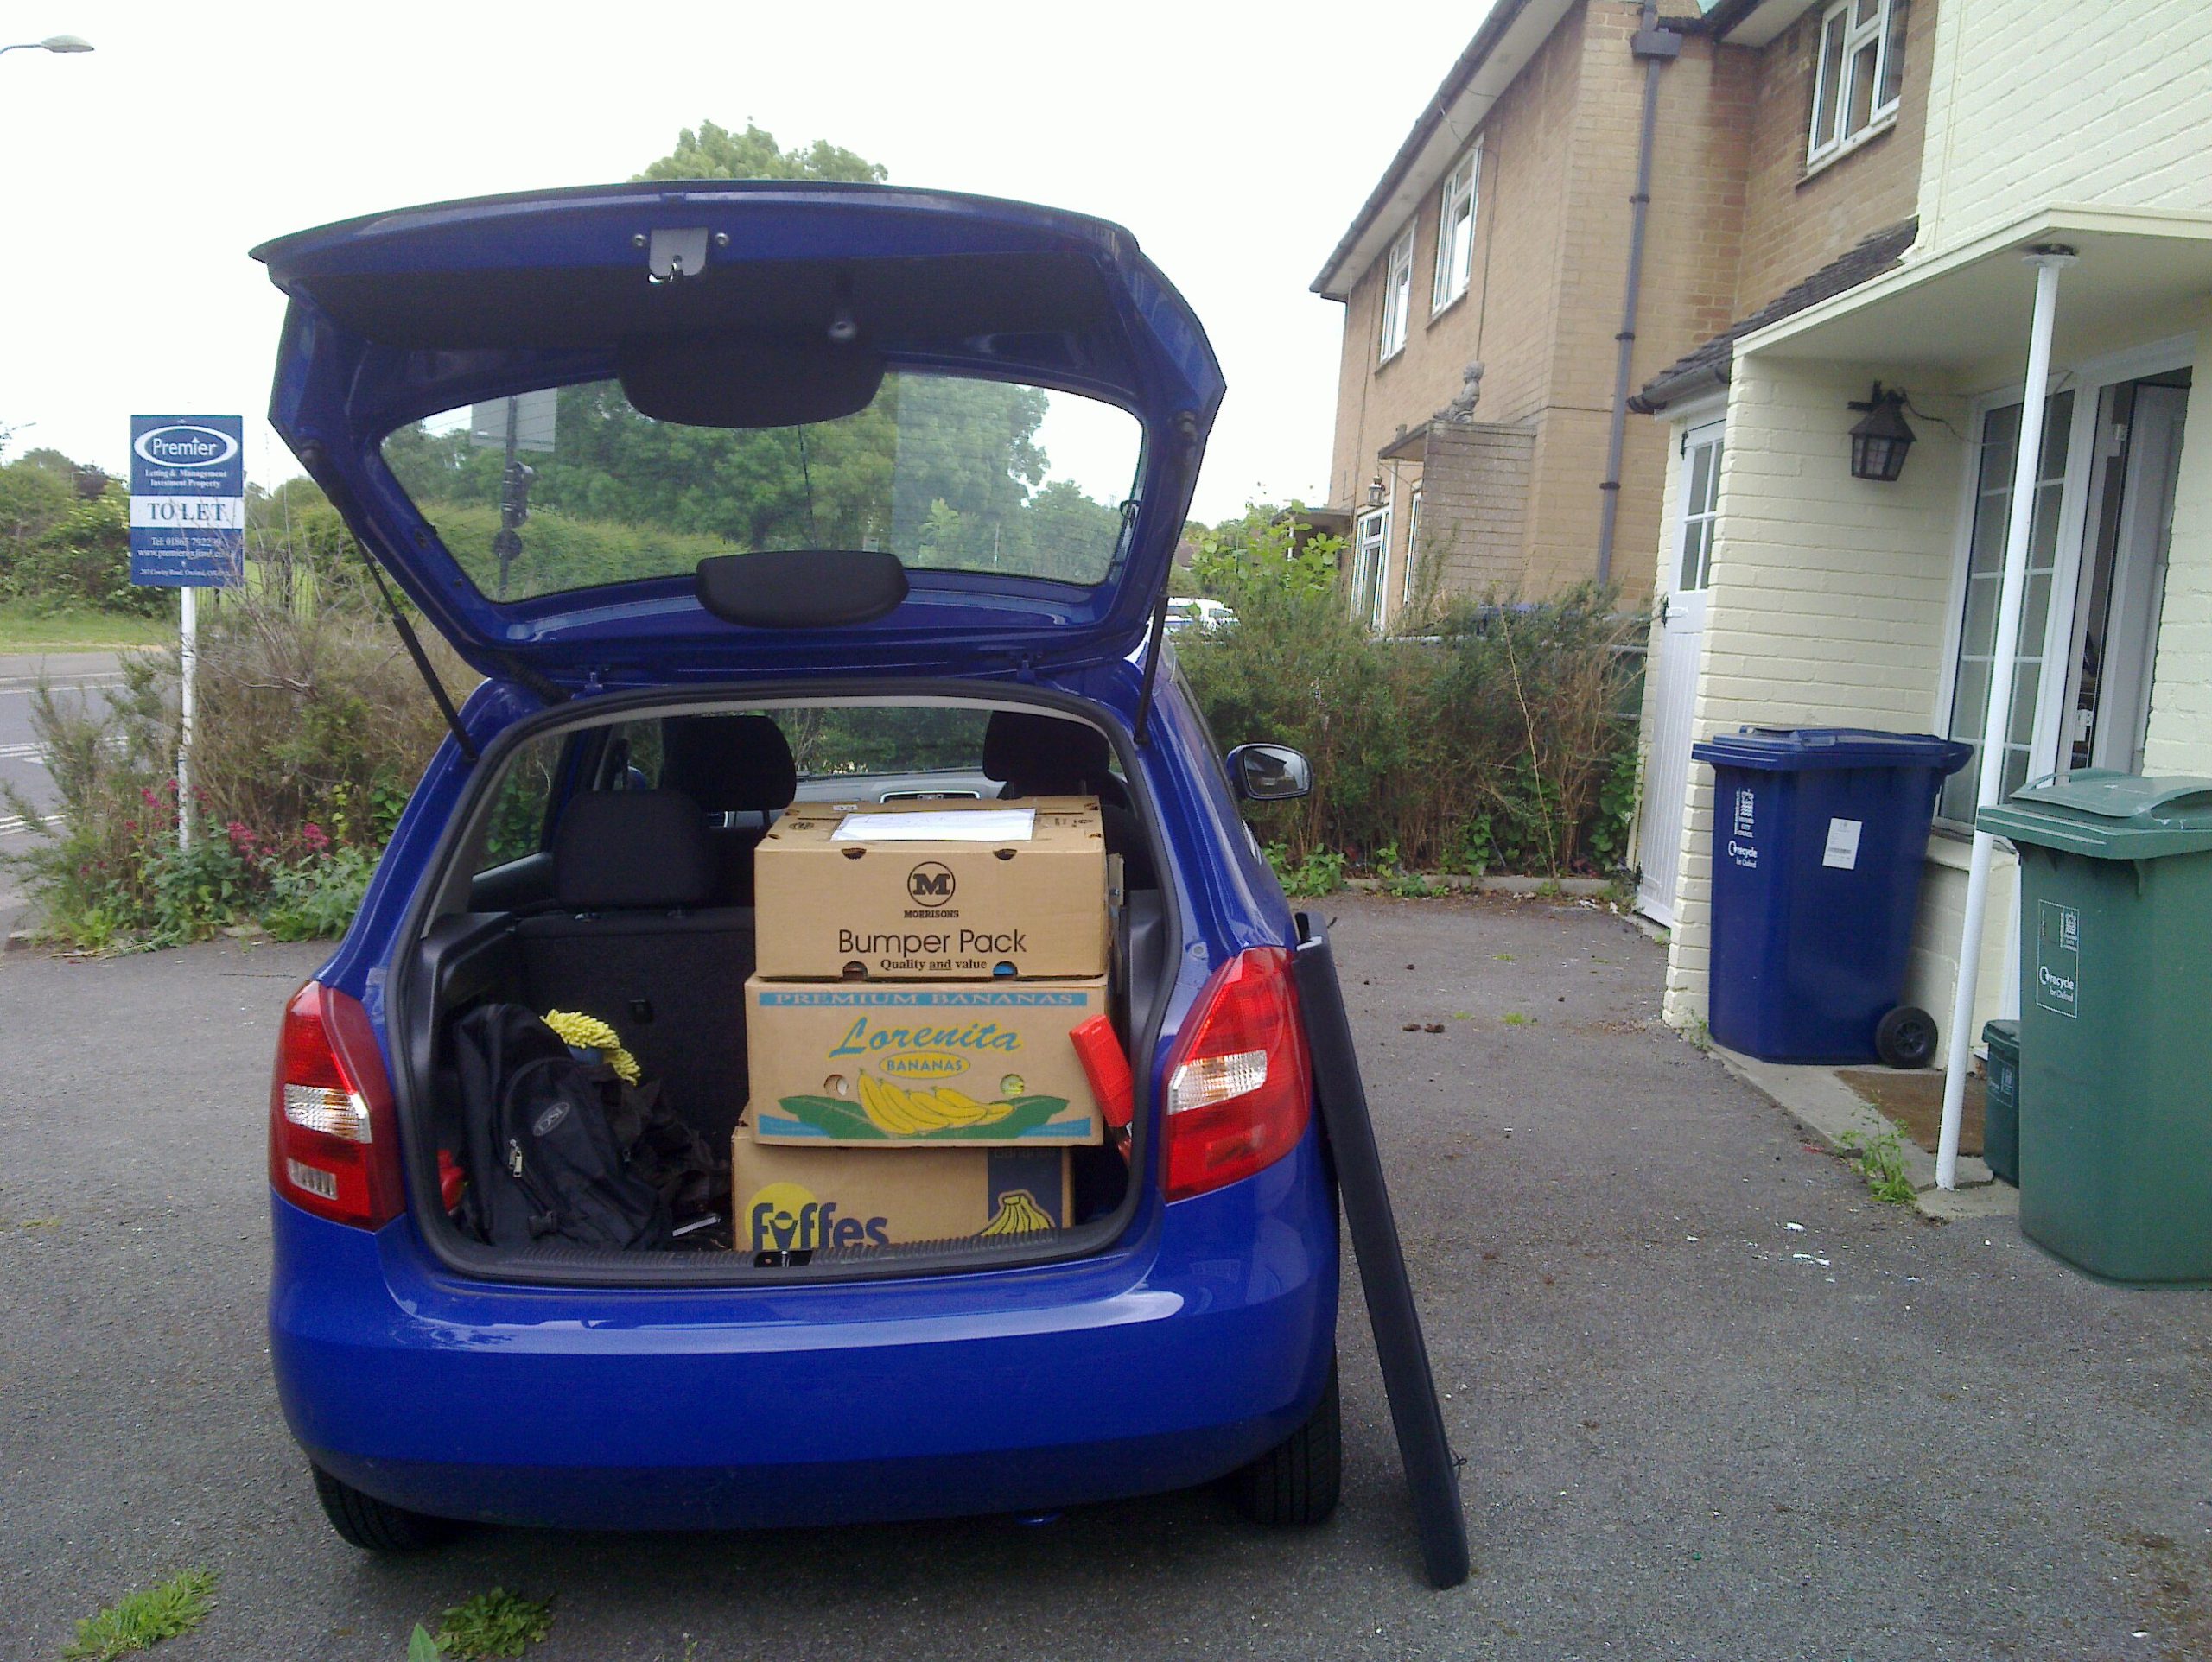 Isis, Ruth and JTA's car, laden with boxes.